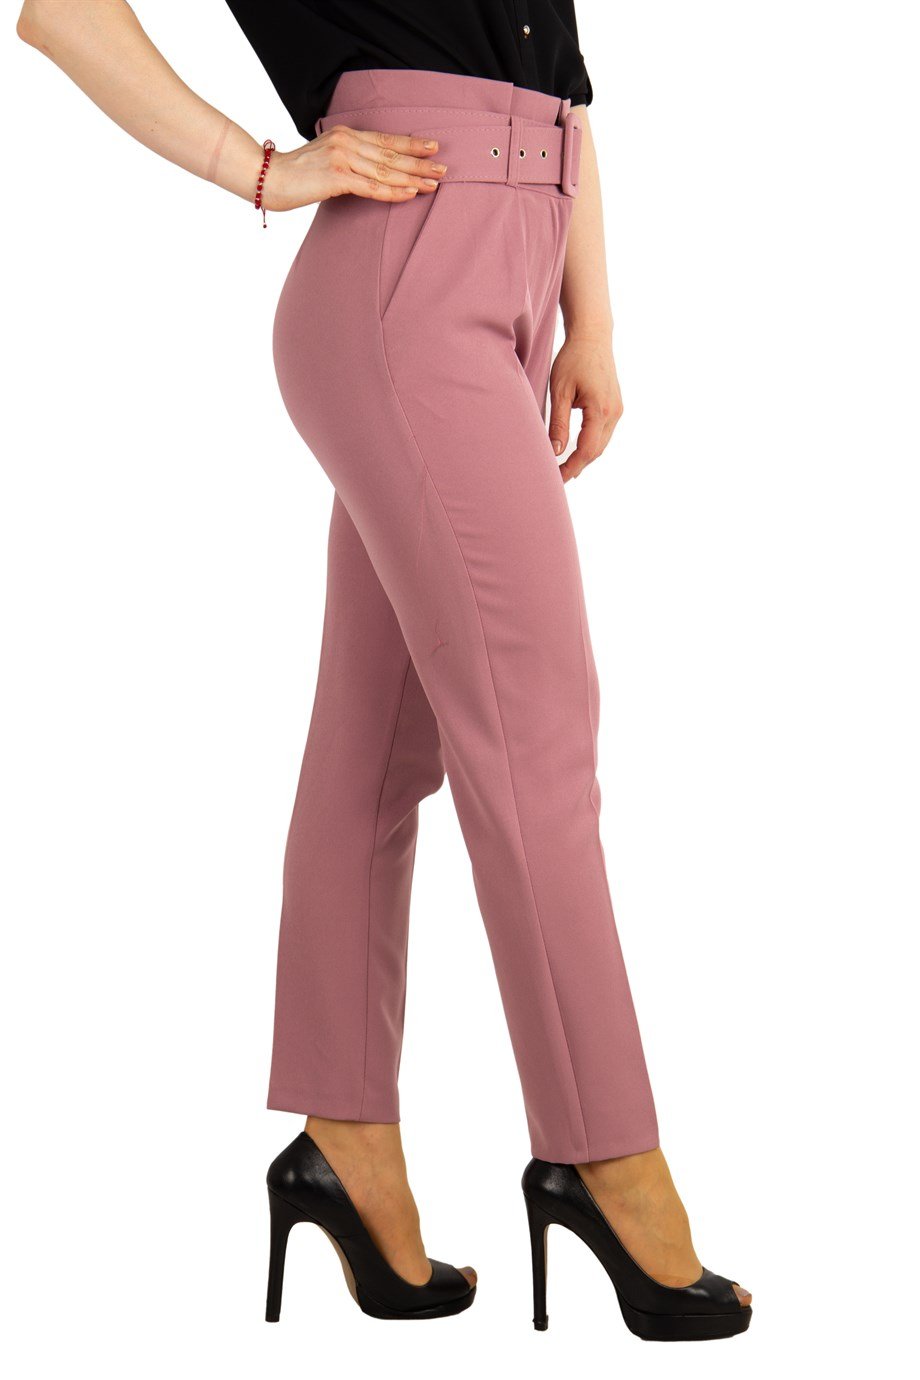 Trousers With Matching Belt Casual Formal Office Pants For Ladies - Indigo  - Wholesale Womens Clothing Vendors For Boutiques